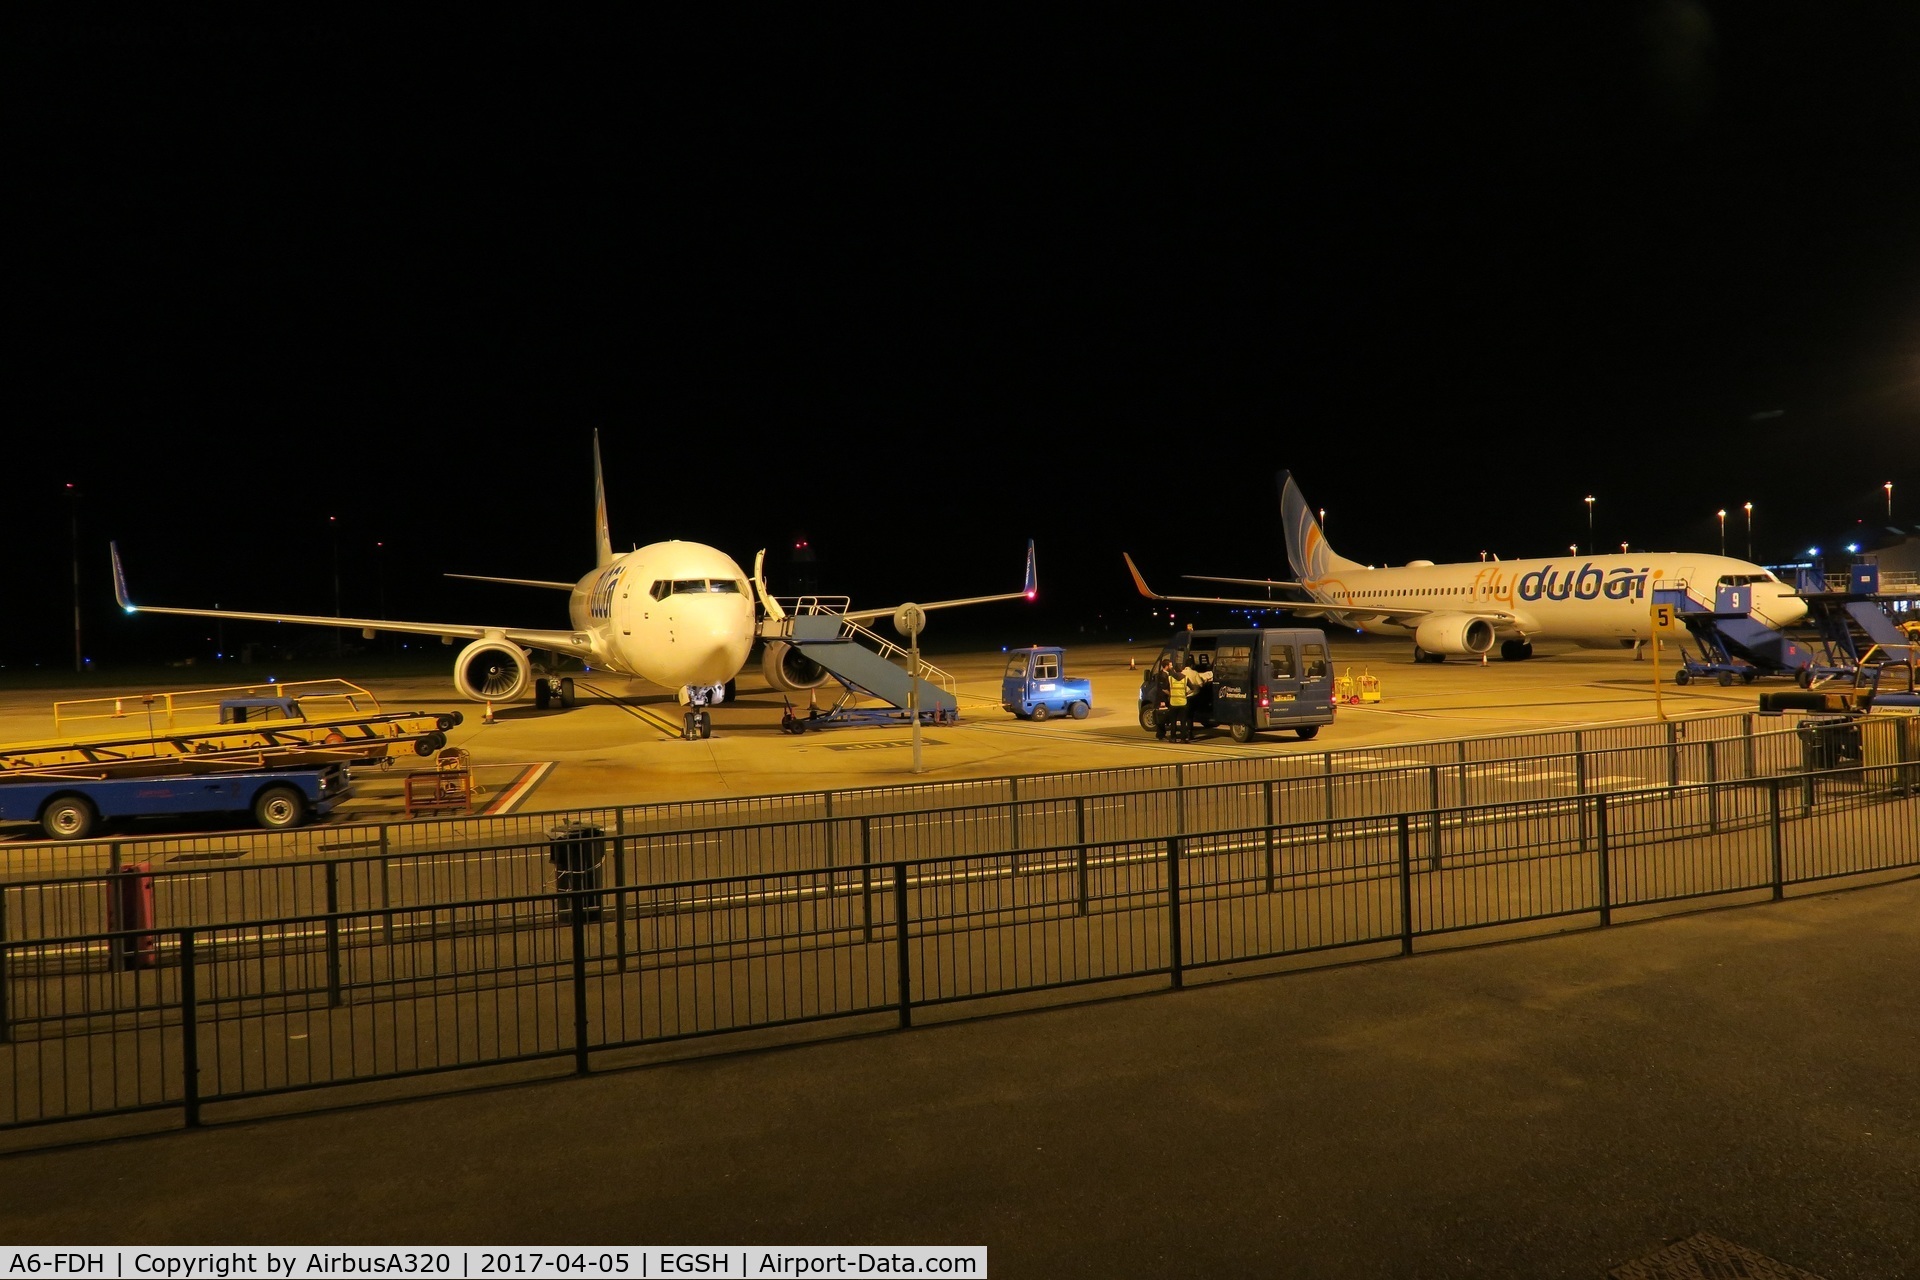 A6-FDH, 2010 Boeing 737-8KN C/N 31716, Norwich plays host to Fly Dubai earlier this year when 5 came through at the end of lease with Fly Dubai
Here we see A6-FDH & A6-FDI parked on the stand shortly after arriving